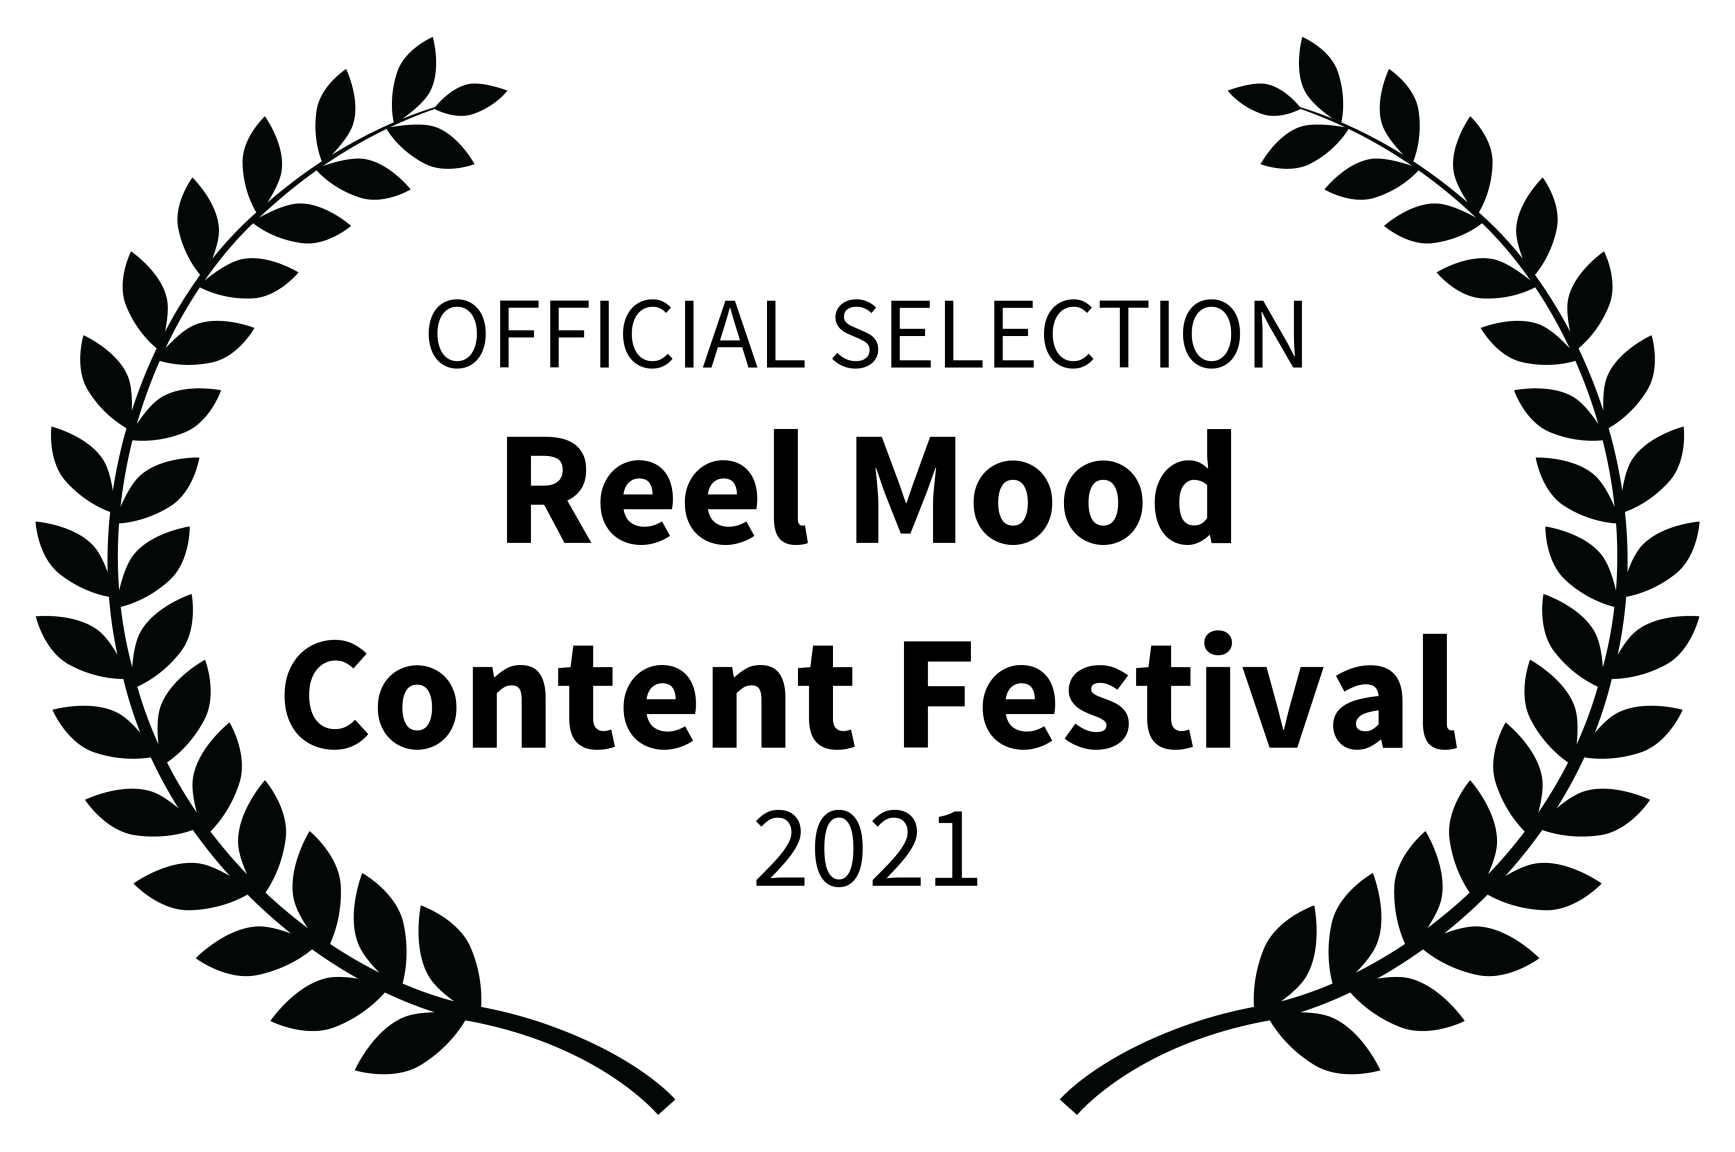 OFFICIAL SELECTION - Reel Mood Content Festival - 2021